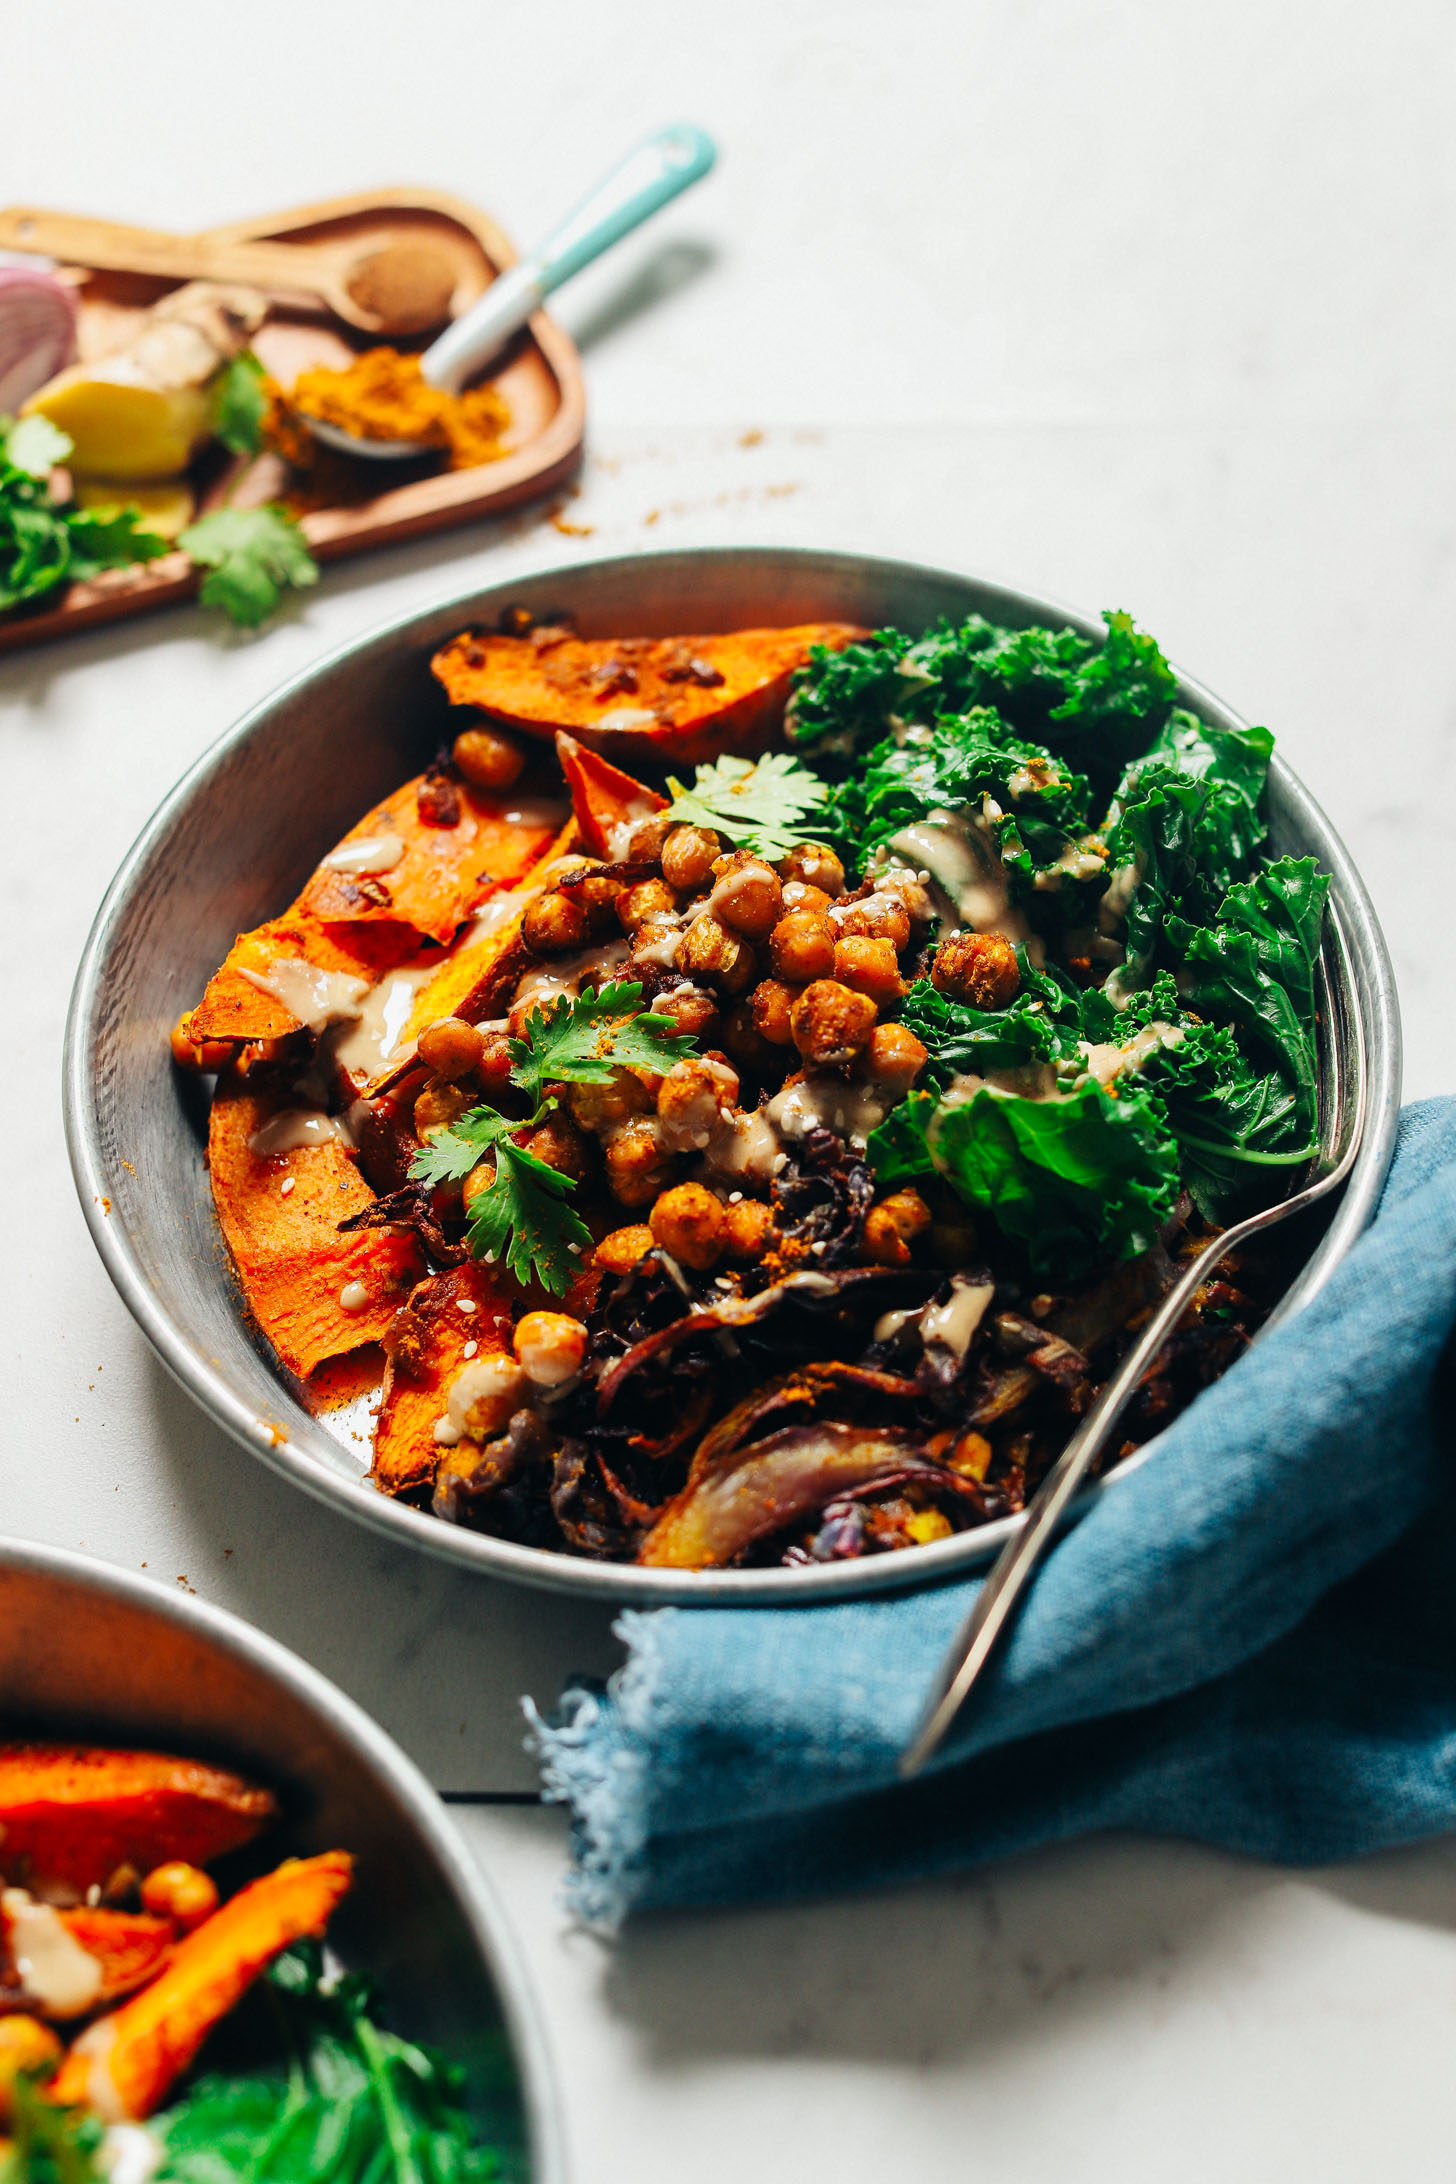 Bowls filled with steamed kale, tahini sauce, and our Sweet Potato Sheet Pan Dinner recipe